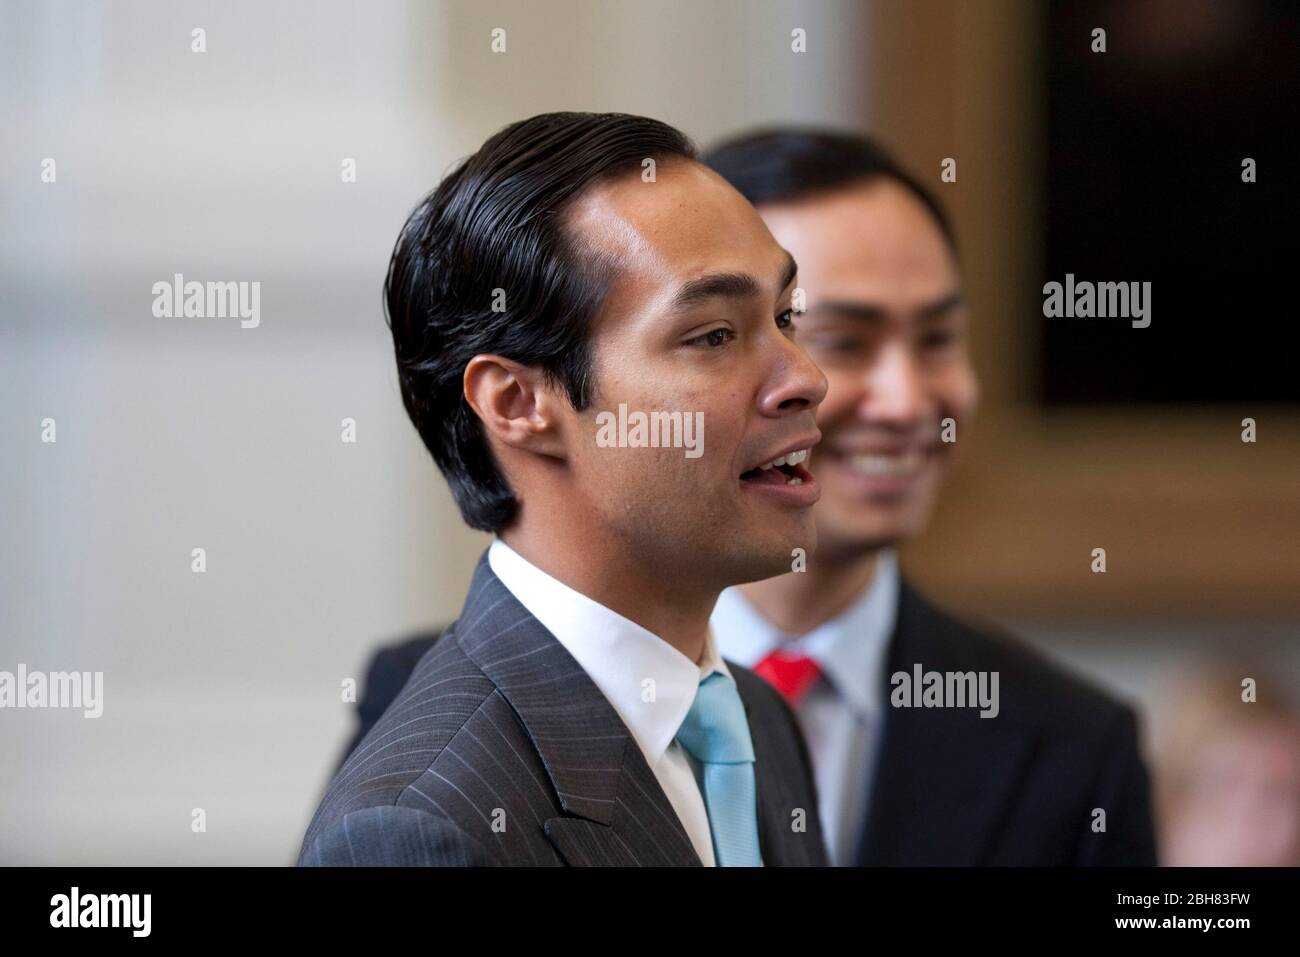 Austin Texas USA, May 27, 2009: Newly-elected mayor of San Antonio, Julian Castro, visits with legislators at the Texas Capitol following his spring election victory. Castro's identical twin brother, Joaquin (background), is a state representative from San Antonio. ©Bob Daemmrich Stock Photo